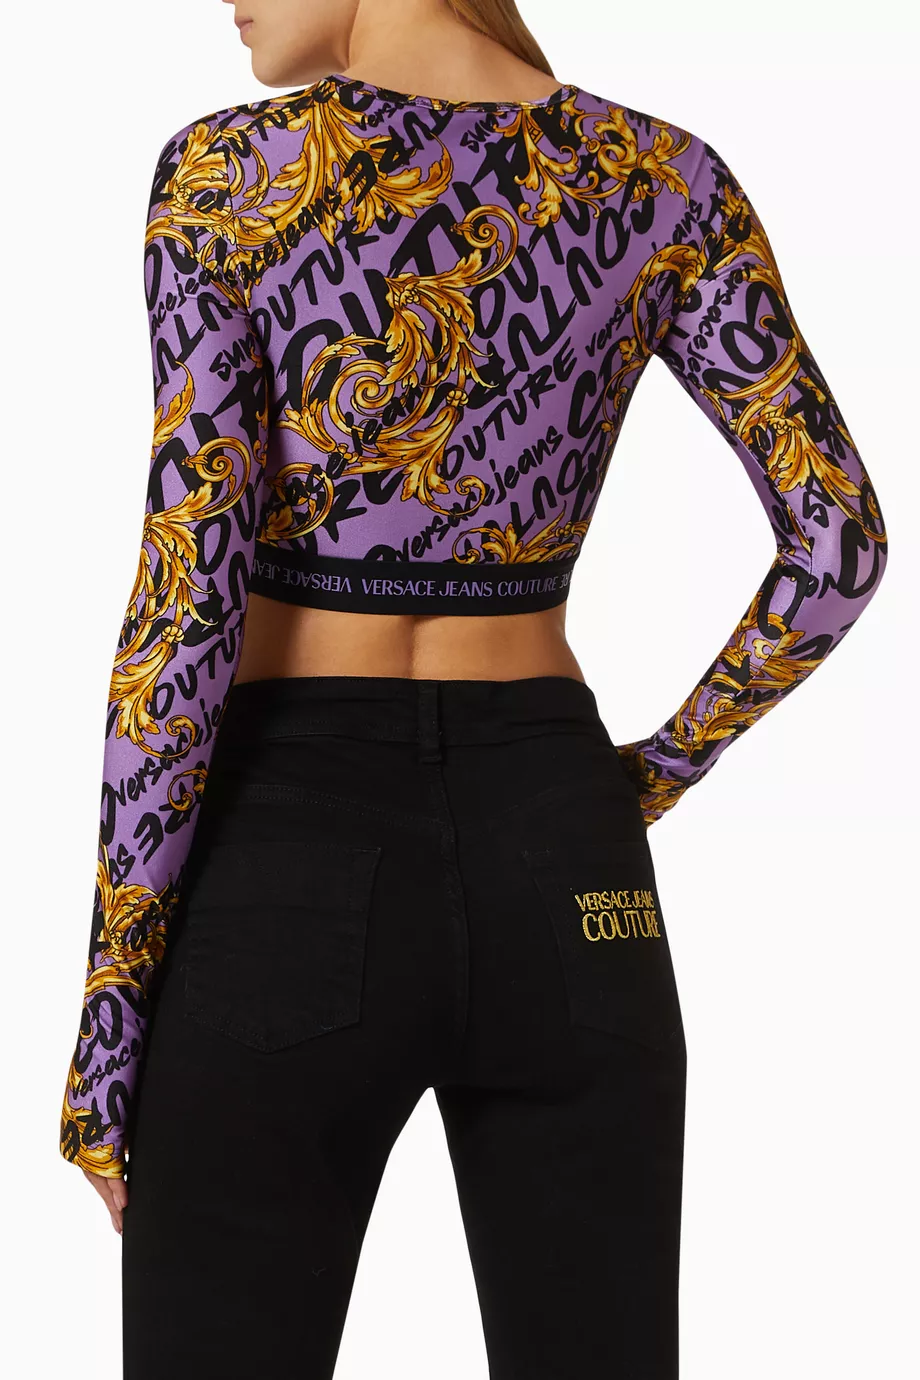 VERSACE JEANS COUTURE 新品 タグ付き 保管傷 総柄ブルゾン